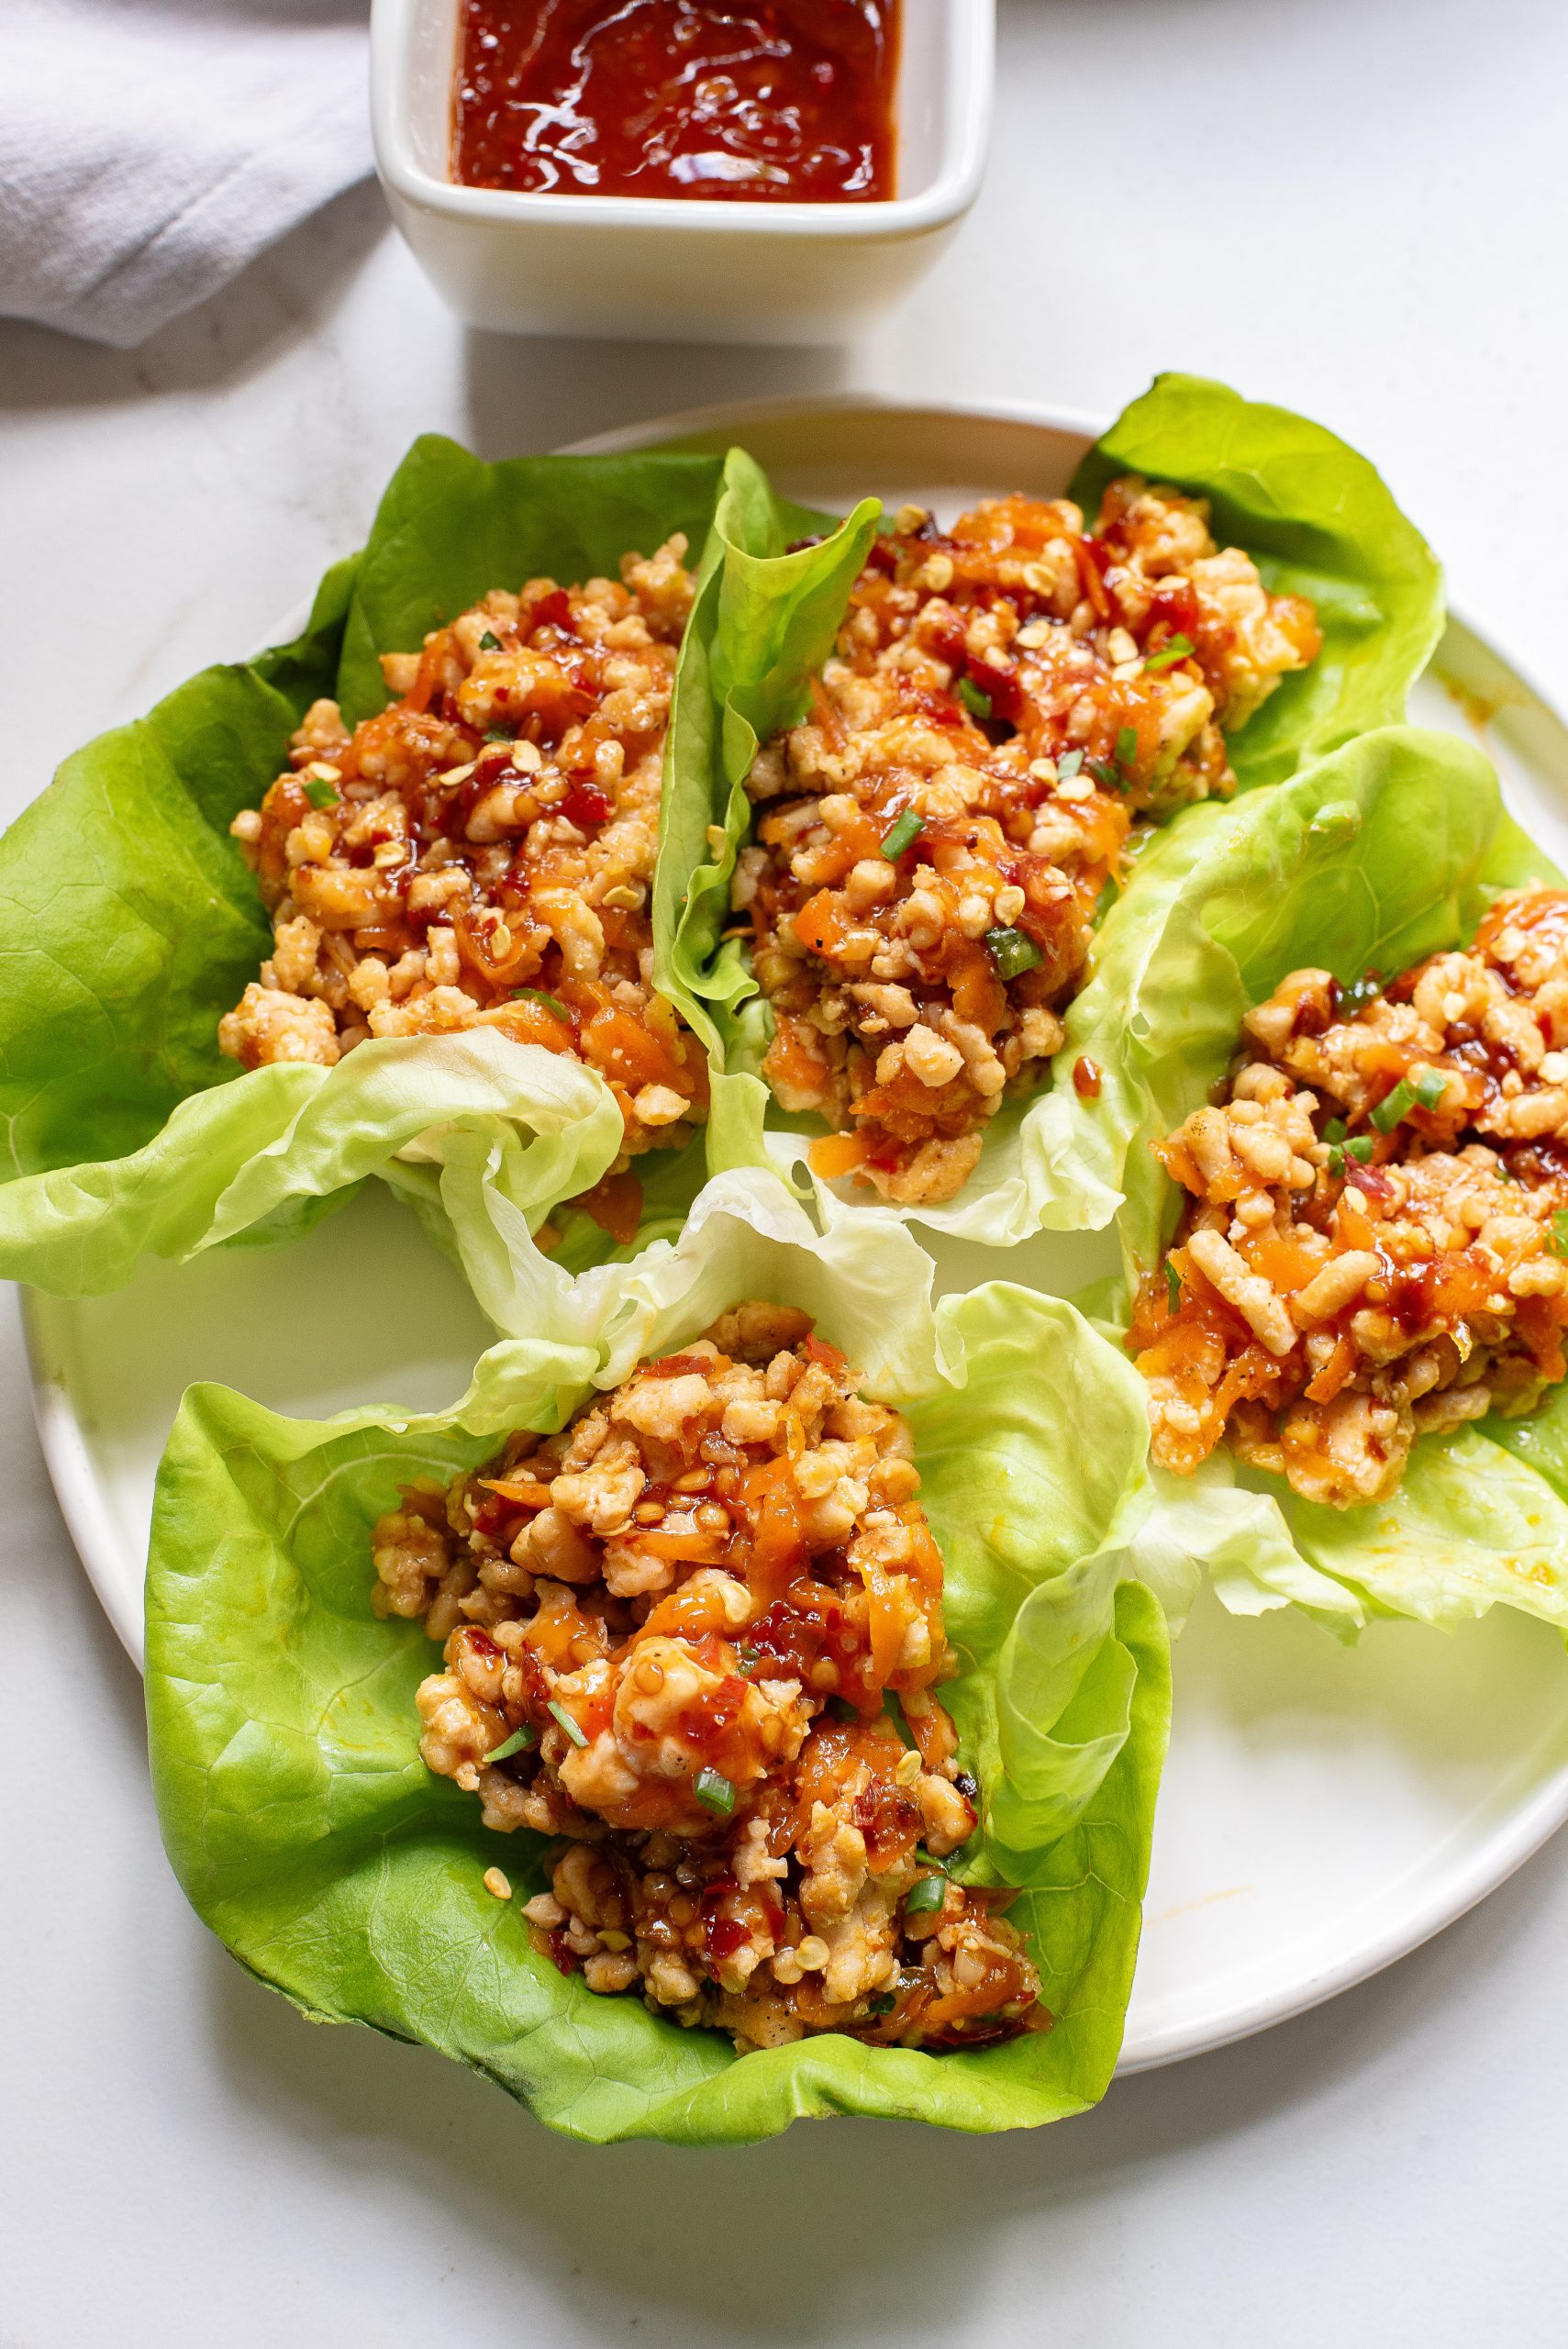 Lettuce  filled with savory minced meat and grains, served with a side of red sauce on a white plate.